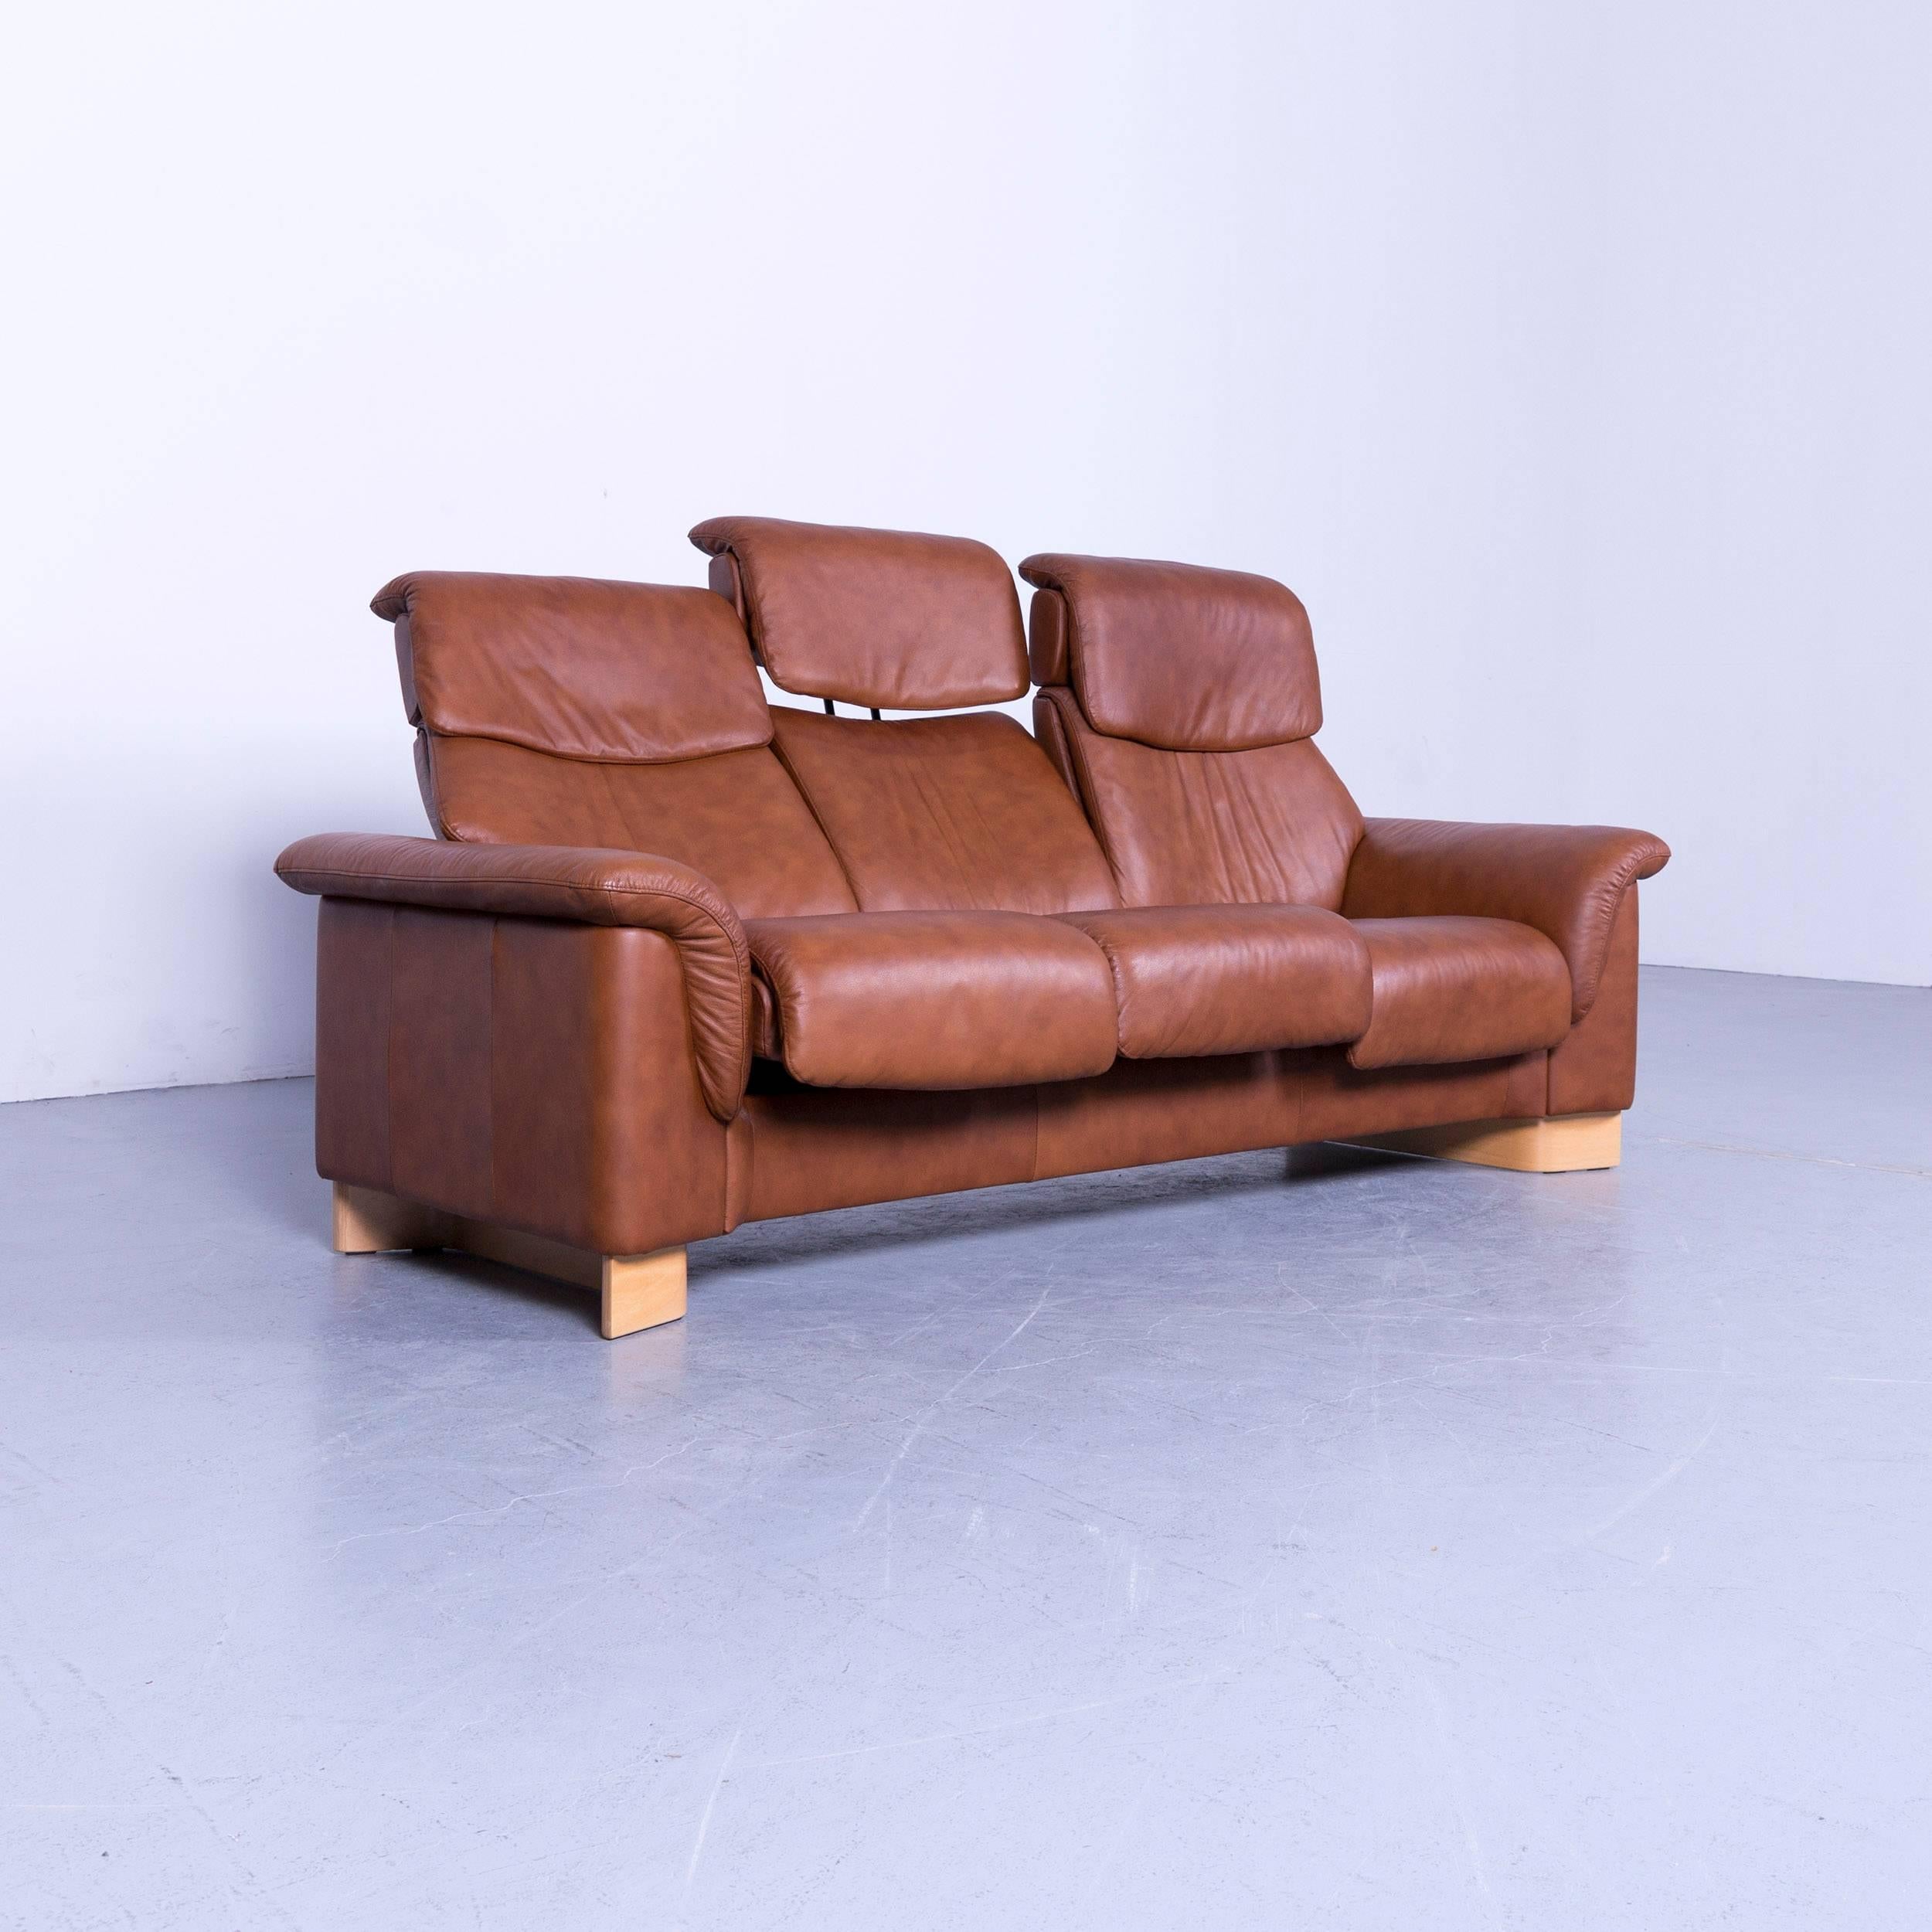 We bring to you an Ekornes Stressless sofa brown leather three-seat recliner.

















